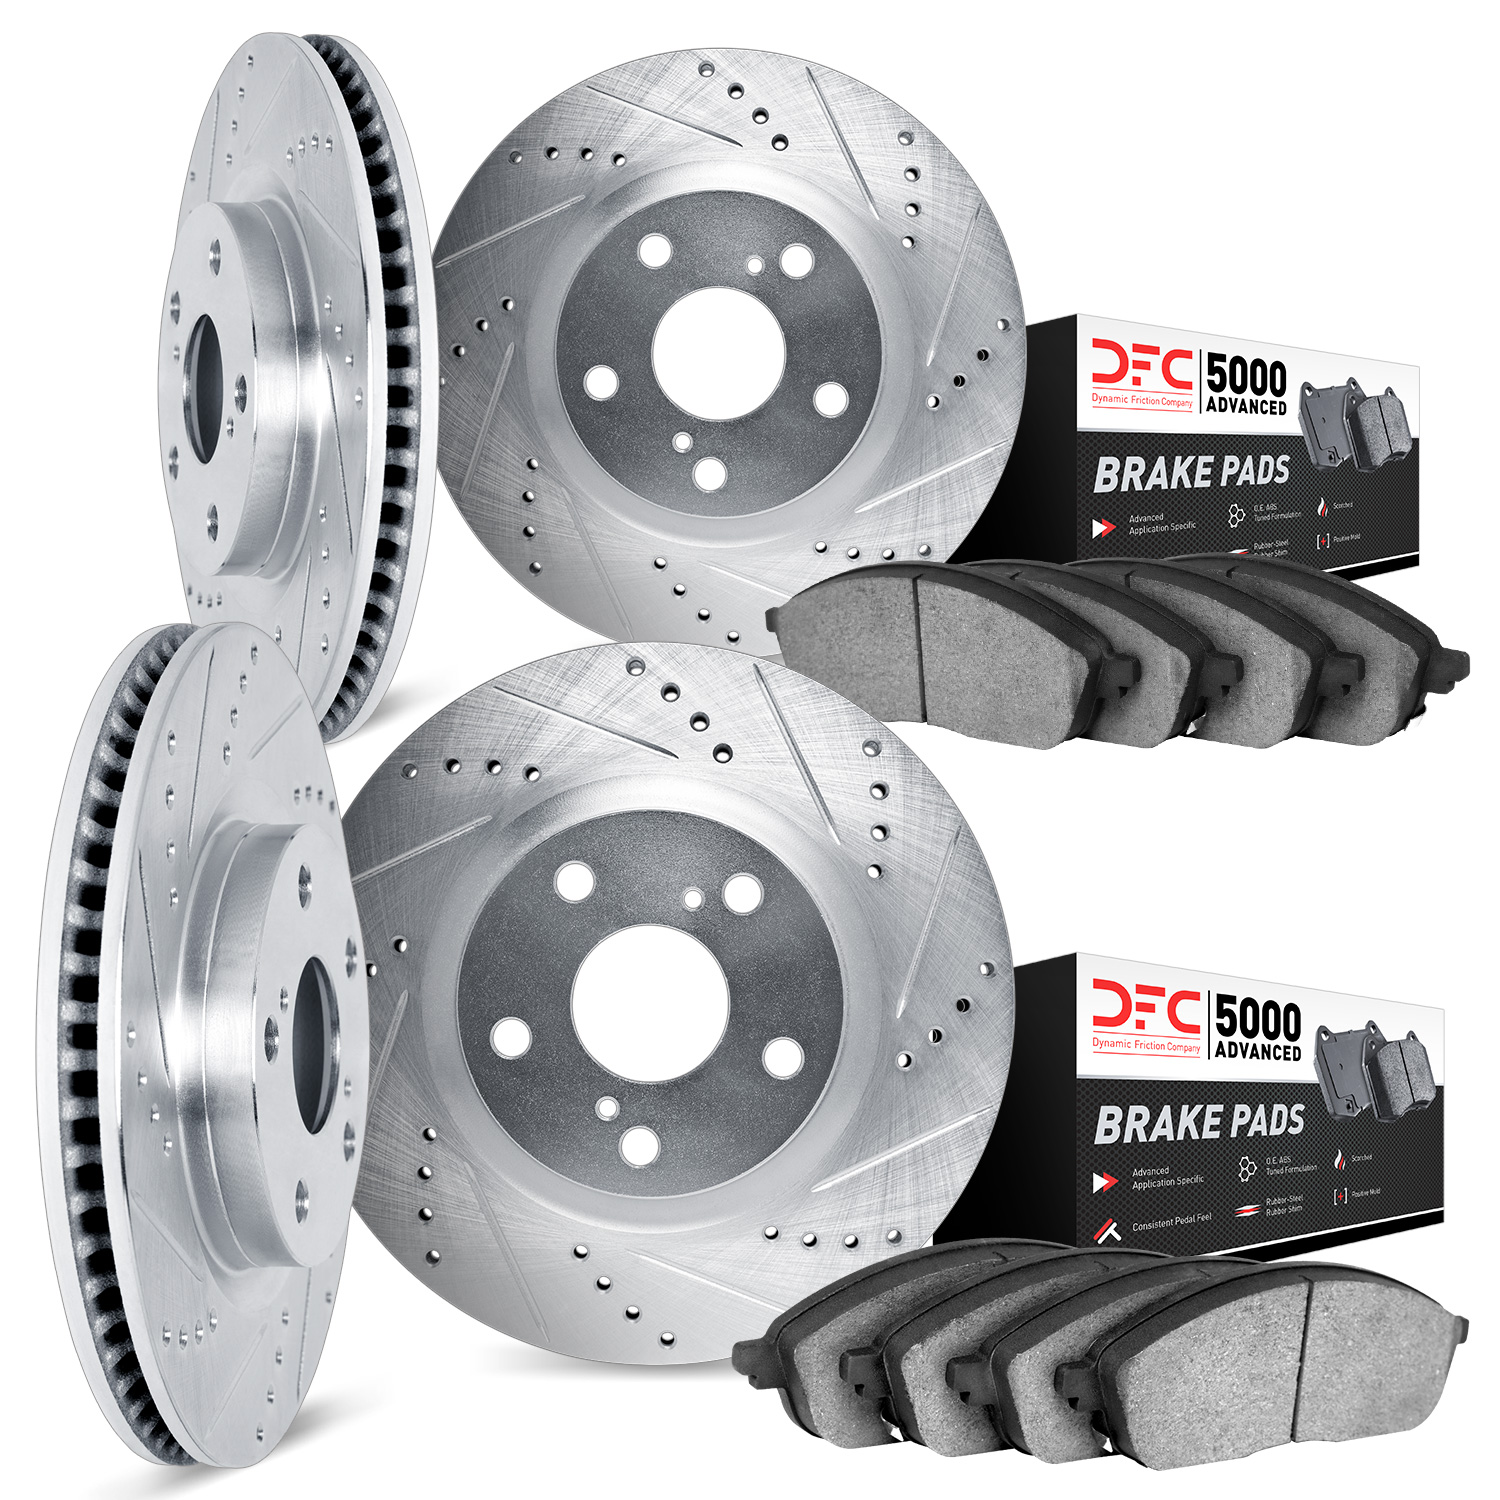 7504-31082 Drilled/Slotted Brake Rotors w/5000 Advanced Brake Pads Kit [Silver], 2006-2008 BMW, Position: Front and Rear